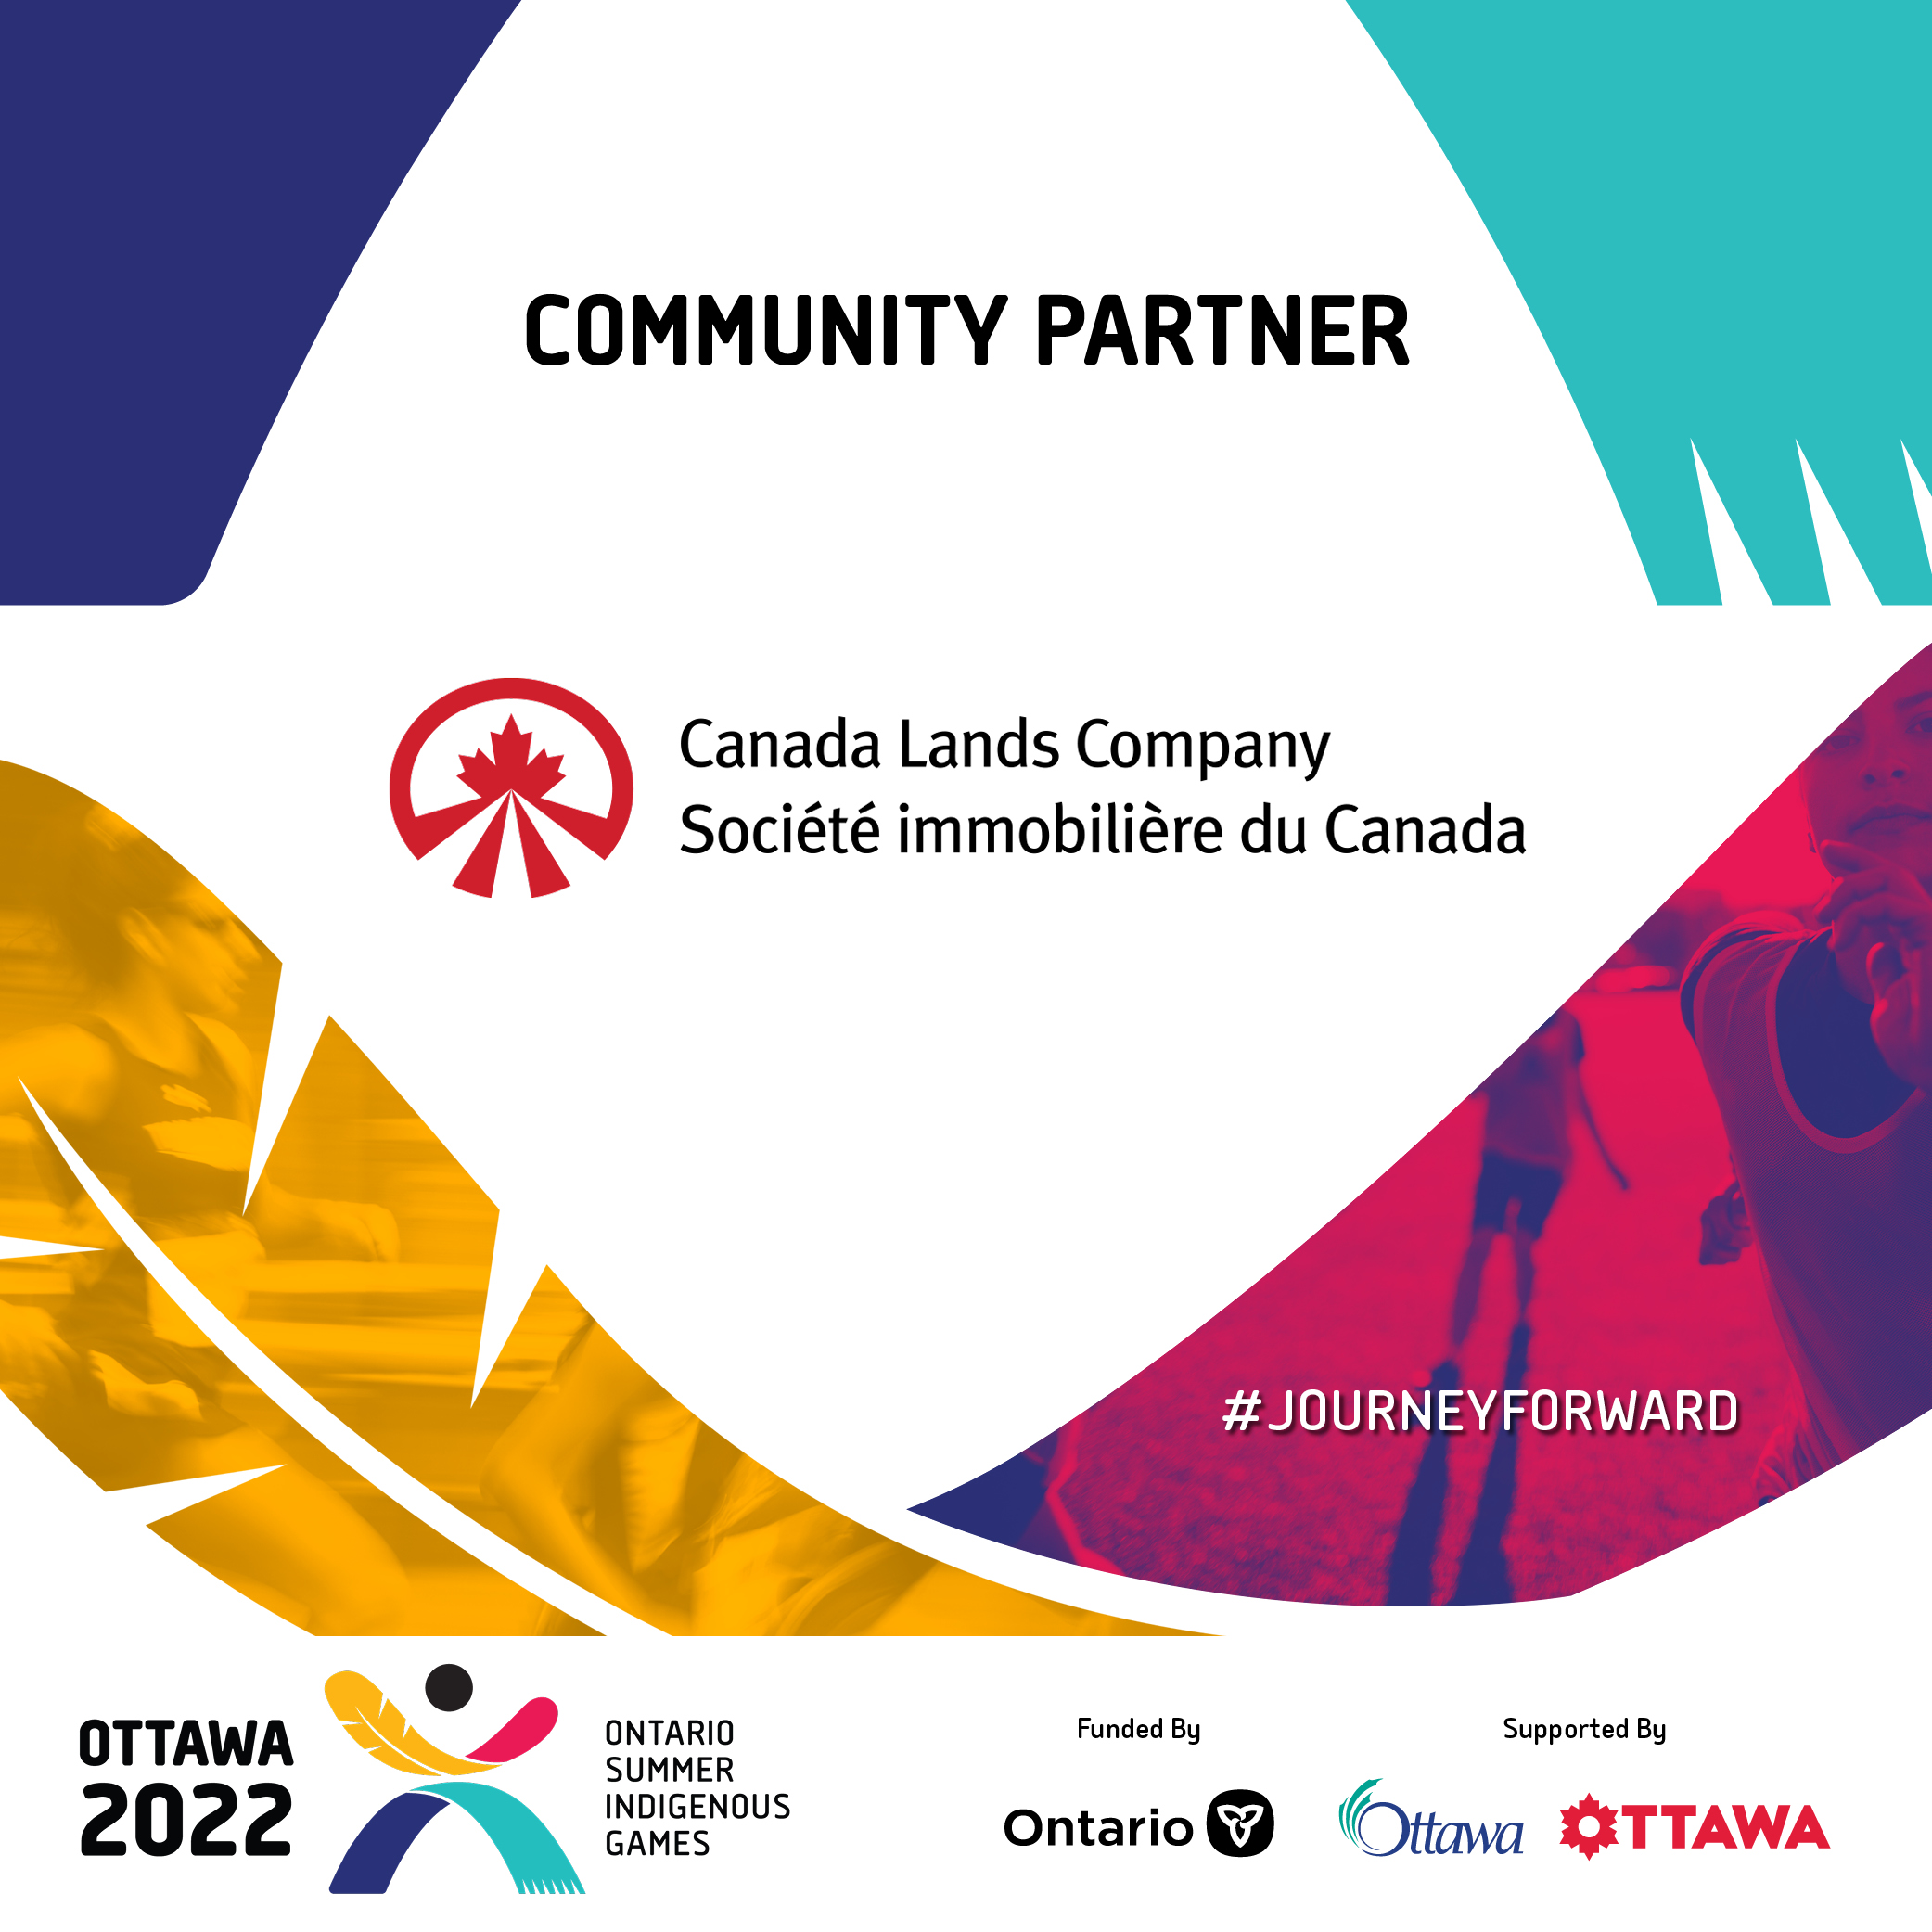 CANADA LANDS COMPANY A RETURN PLAYER WITH A KEY SPONSORSHIP FOR THE 2022 ONTARIO SUMMER INDIGENOUS GAMES